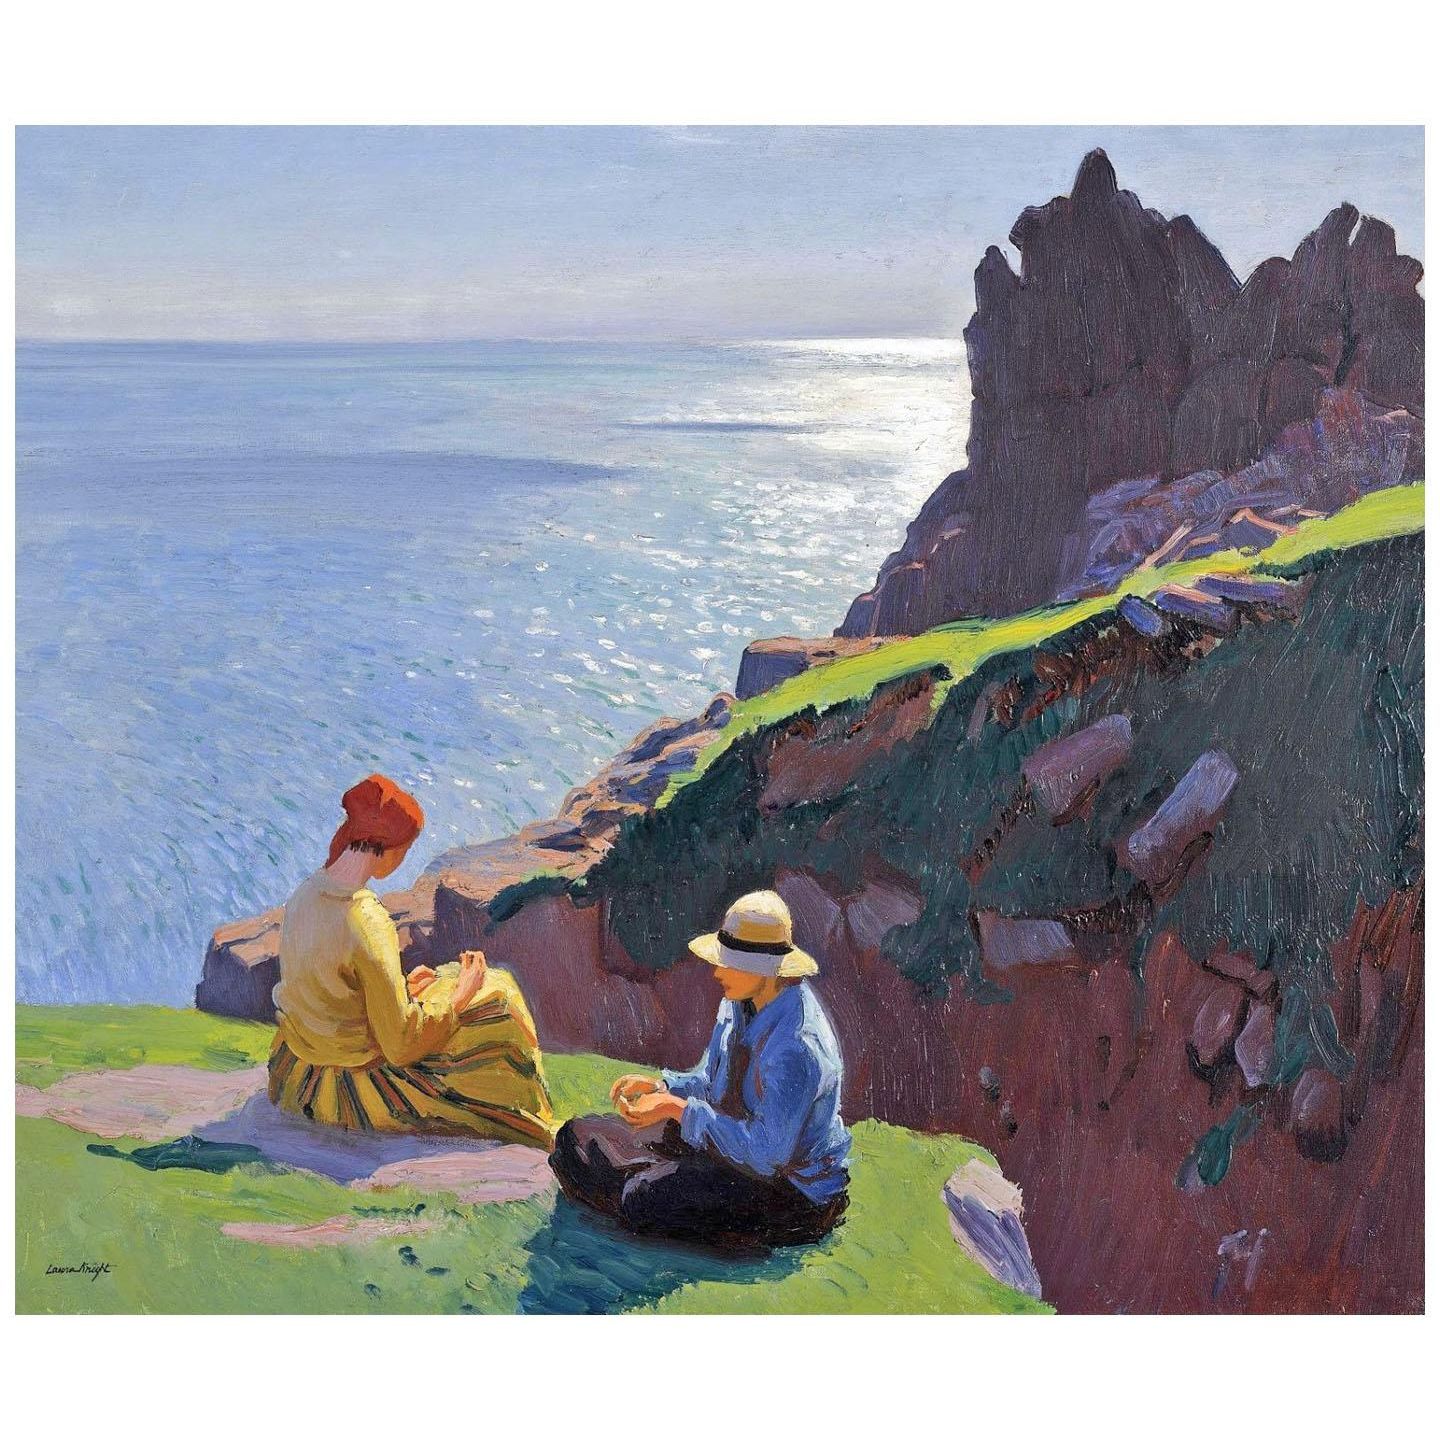 Laura Knight. On the Cliff. 1914. National Museum Wales